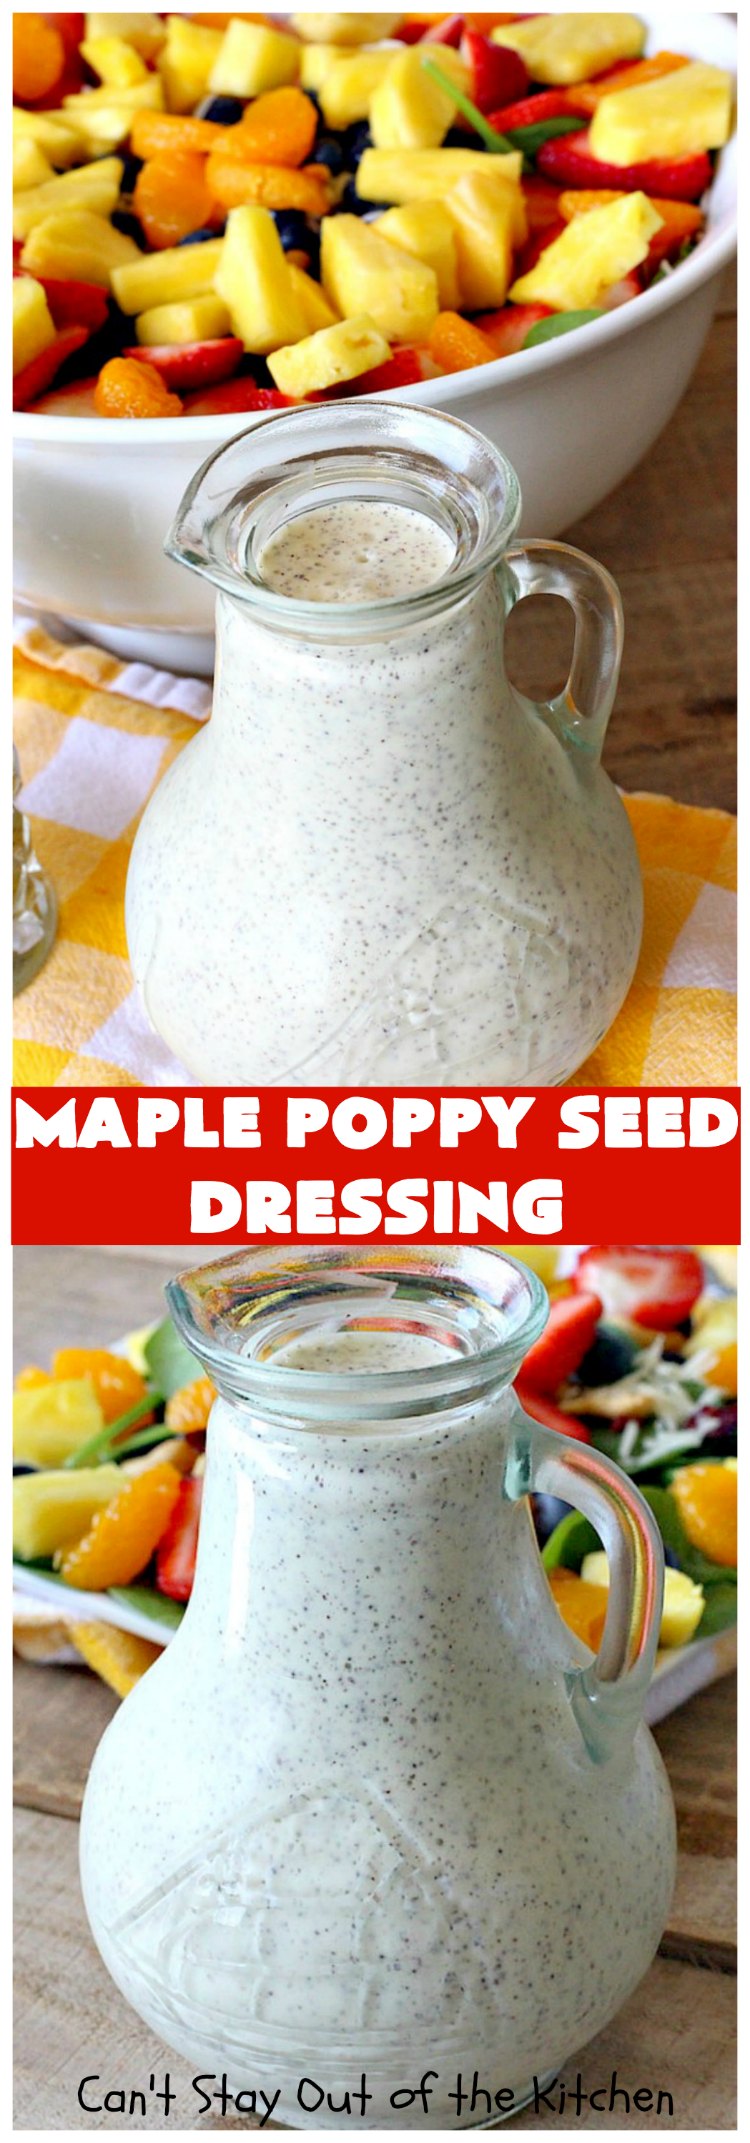 Maple Poppy Seed Dressing | Can't Stay Out of the Kitchen | this is a delicious, #healthy #SaladDressing with NO oil & NO sugar. It uses #GreekYogurt & #MapleSyrup instead. Great with a #TossedSalad with #fruit in it. #GlutenFree #LowCalorie #HealthySaladDressingRecipe